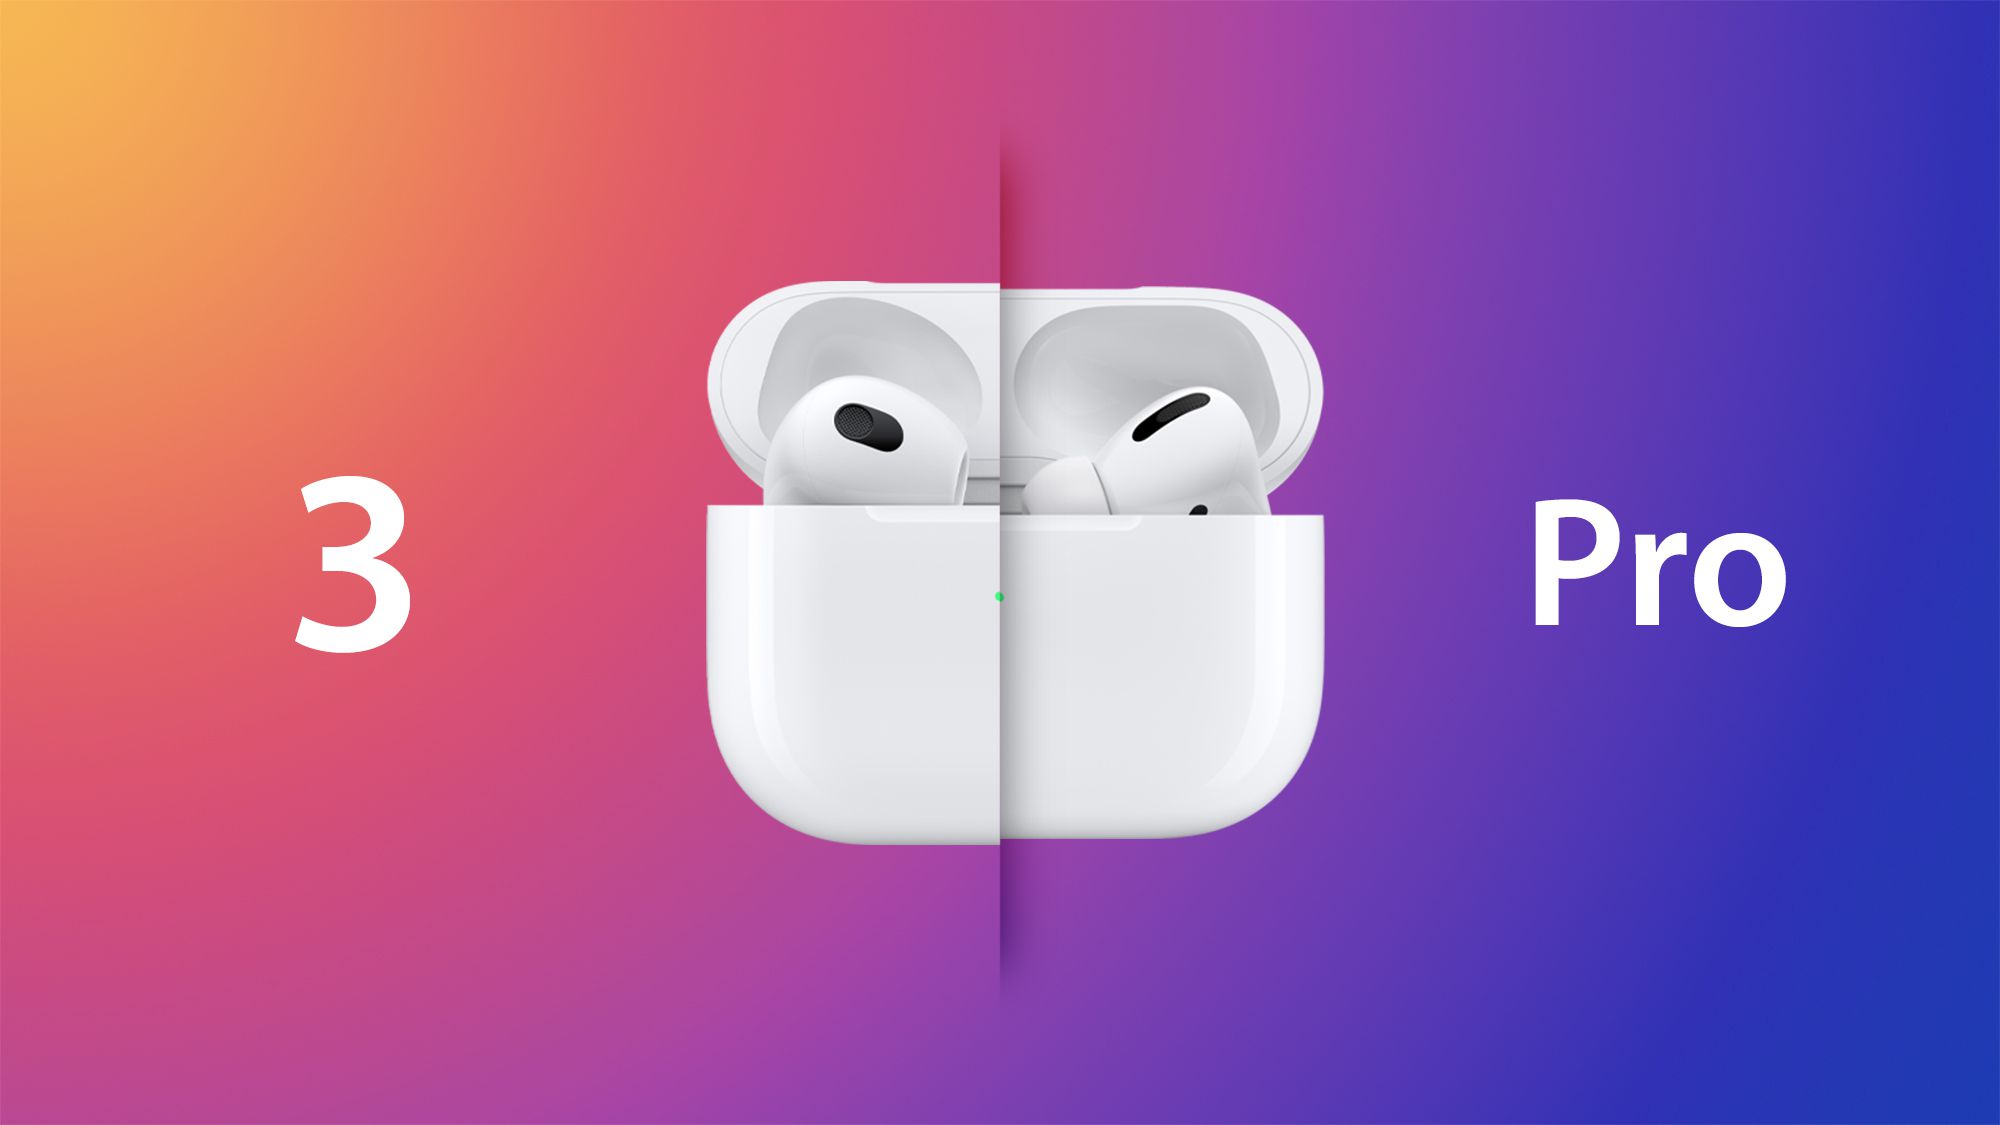 moth curb Prosecute AirPods 3 vs. AirPods Pro 1 Buyer's Guide - MacRumors